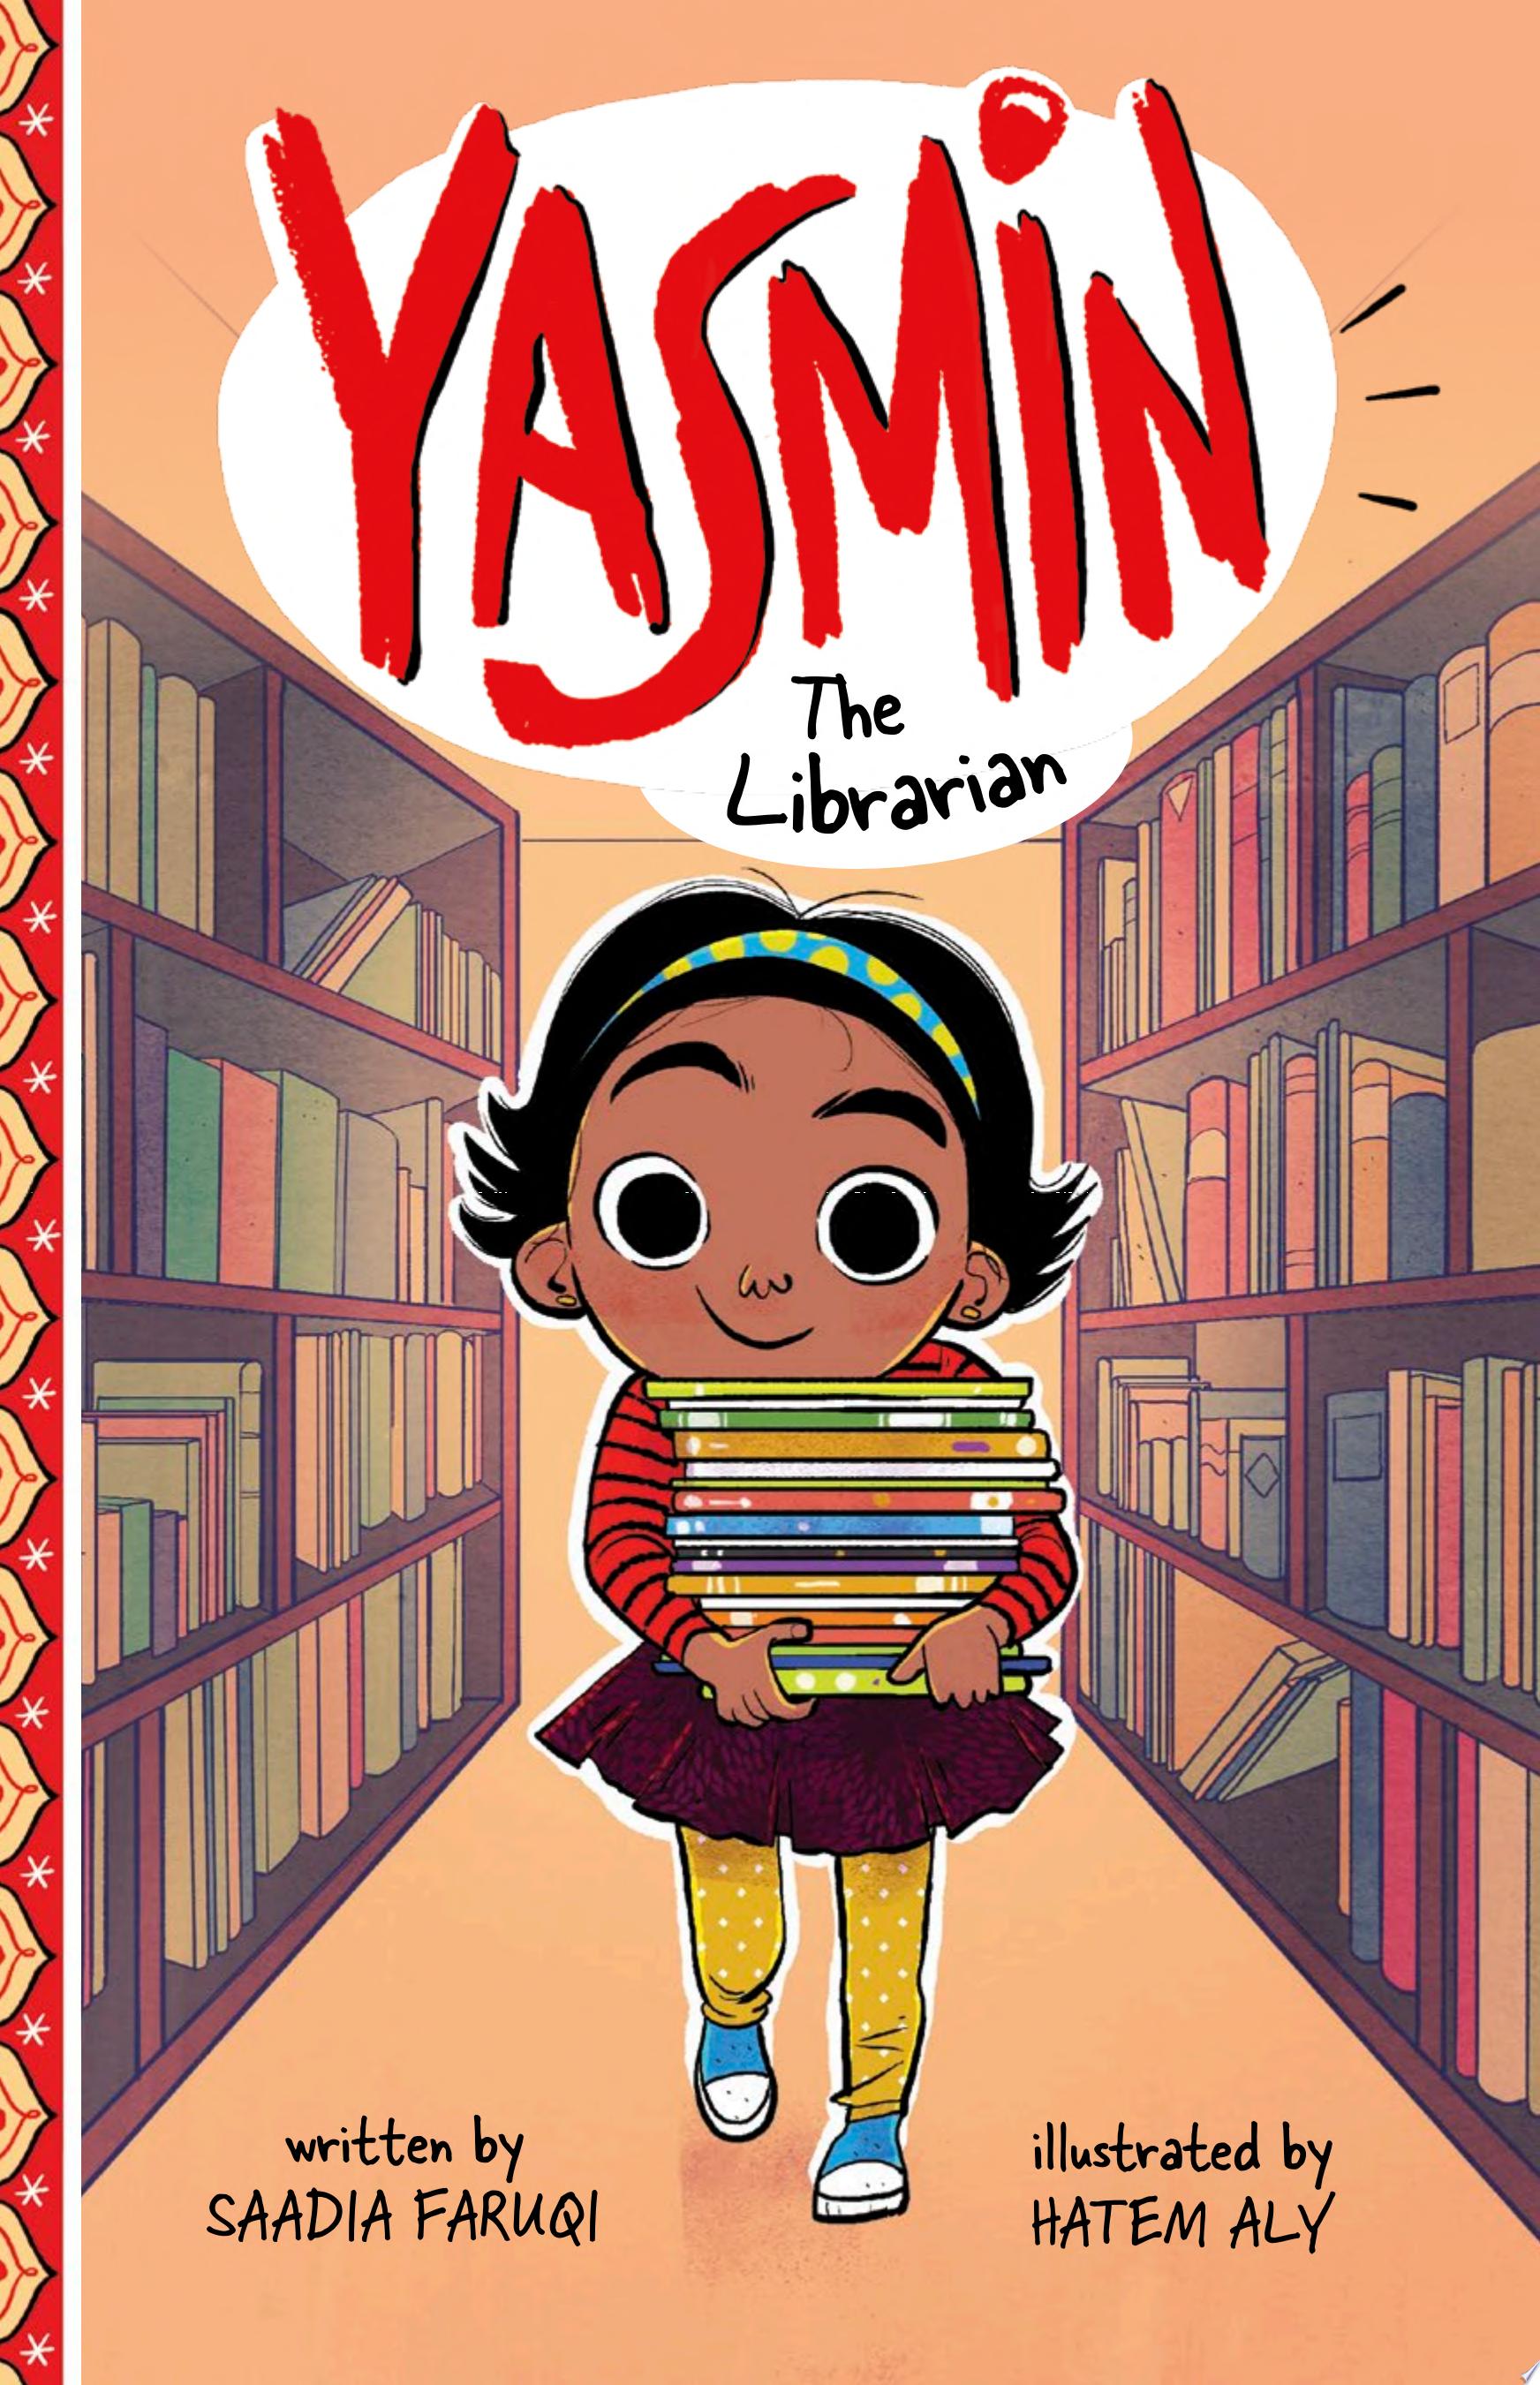 Image for "Yasmin the Librarian"